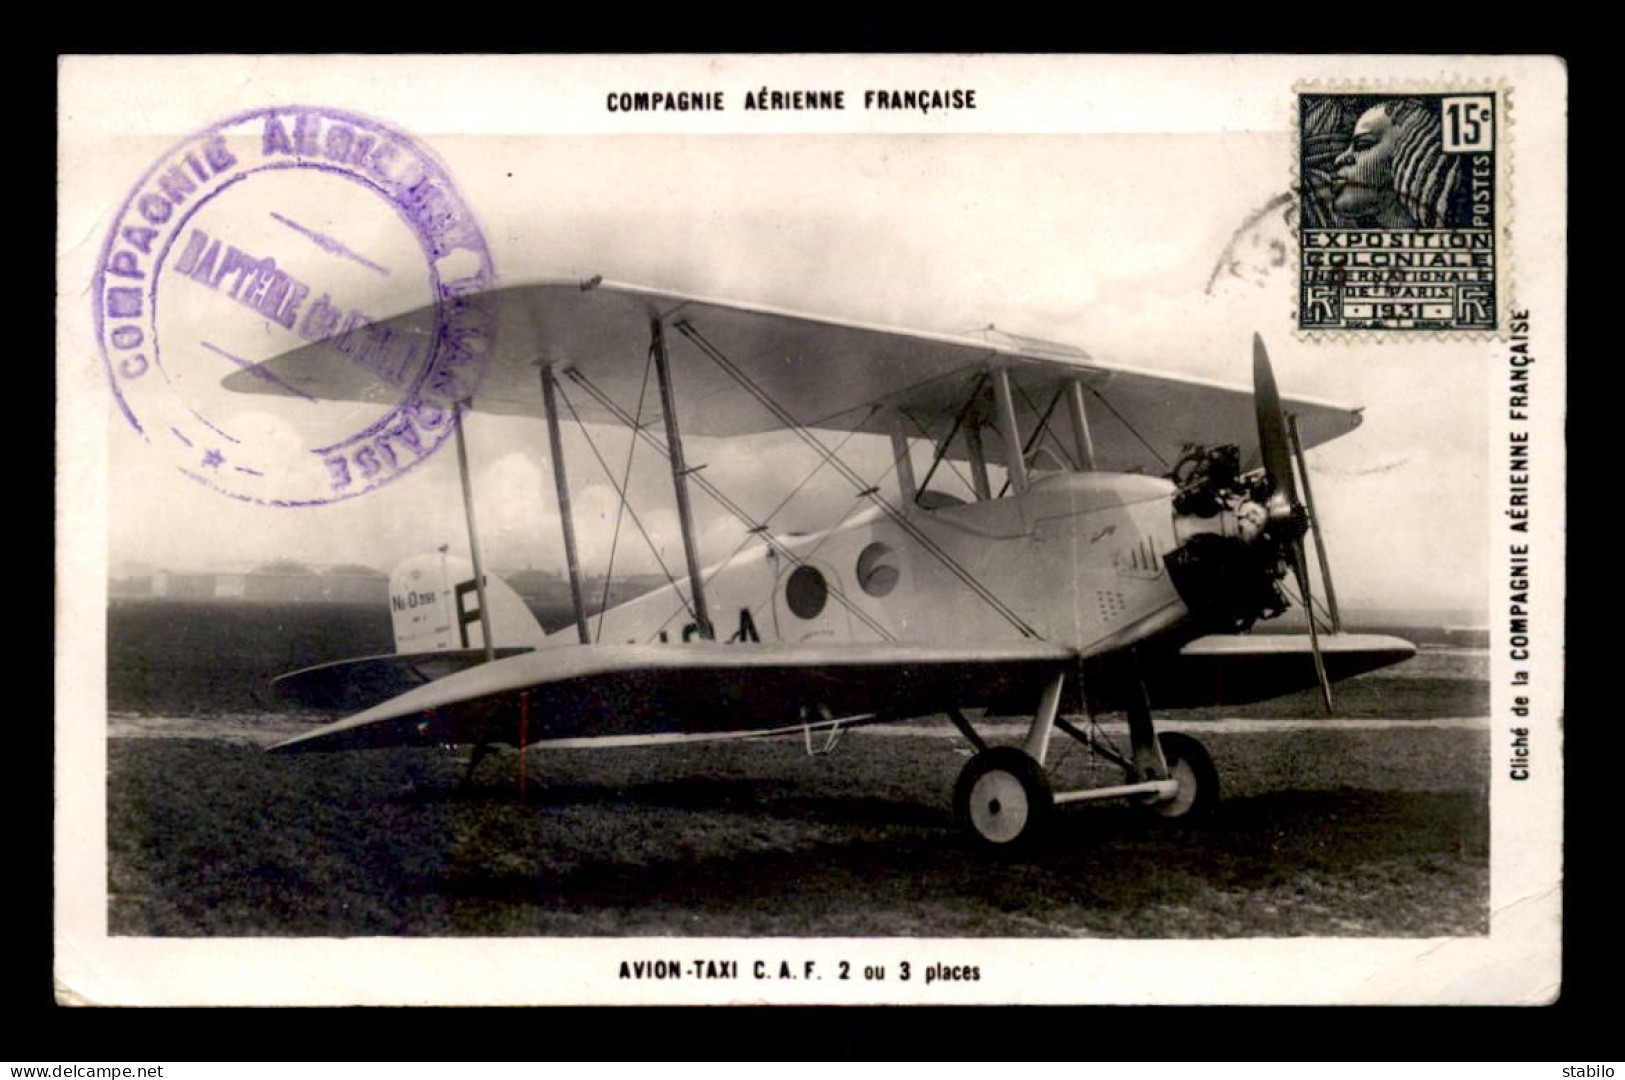 AVIATION - AVION TAXI C.A.F. 2 OU 3 PLACES - COMPAGNIE AERIENNE FRANCAISE - 1919-1938: Between Wars